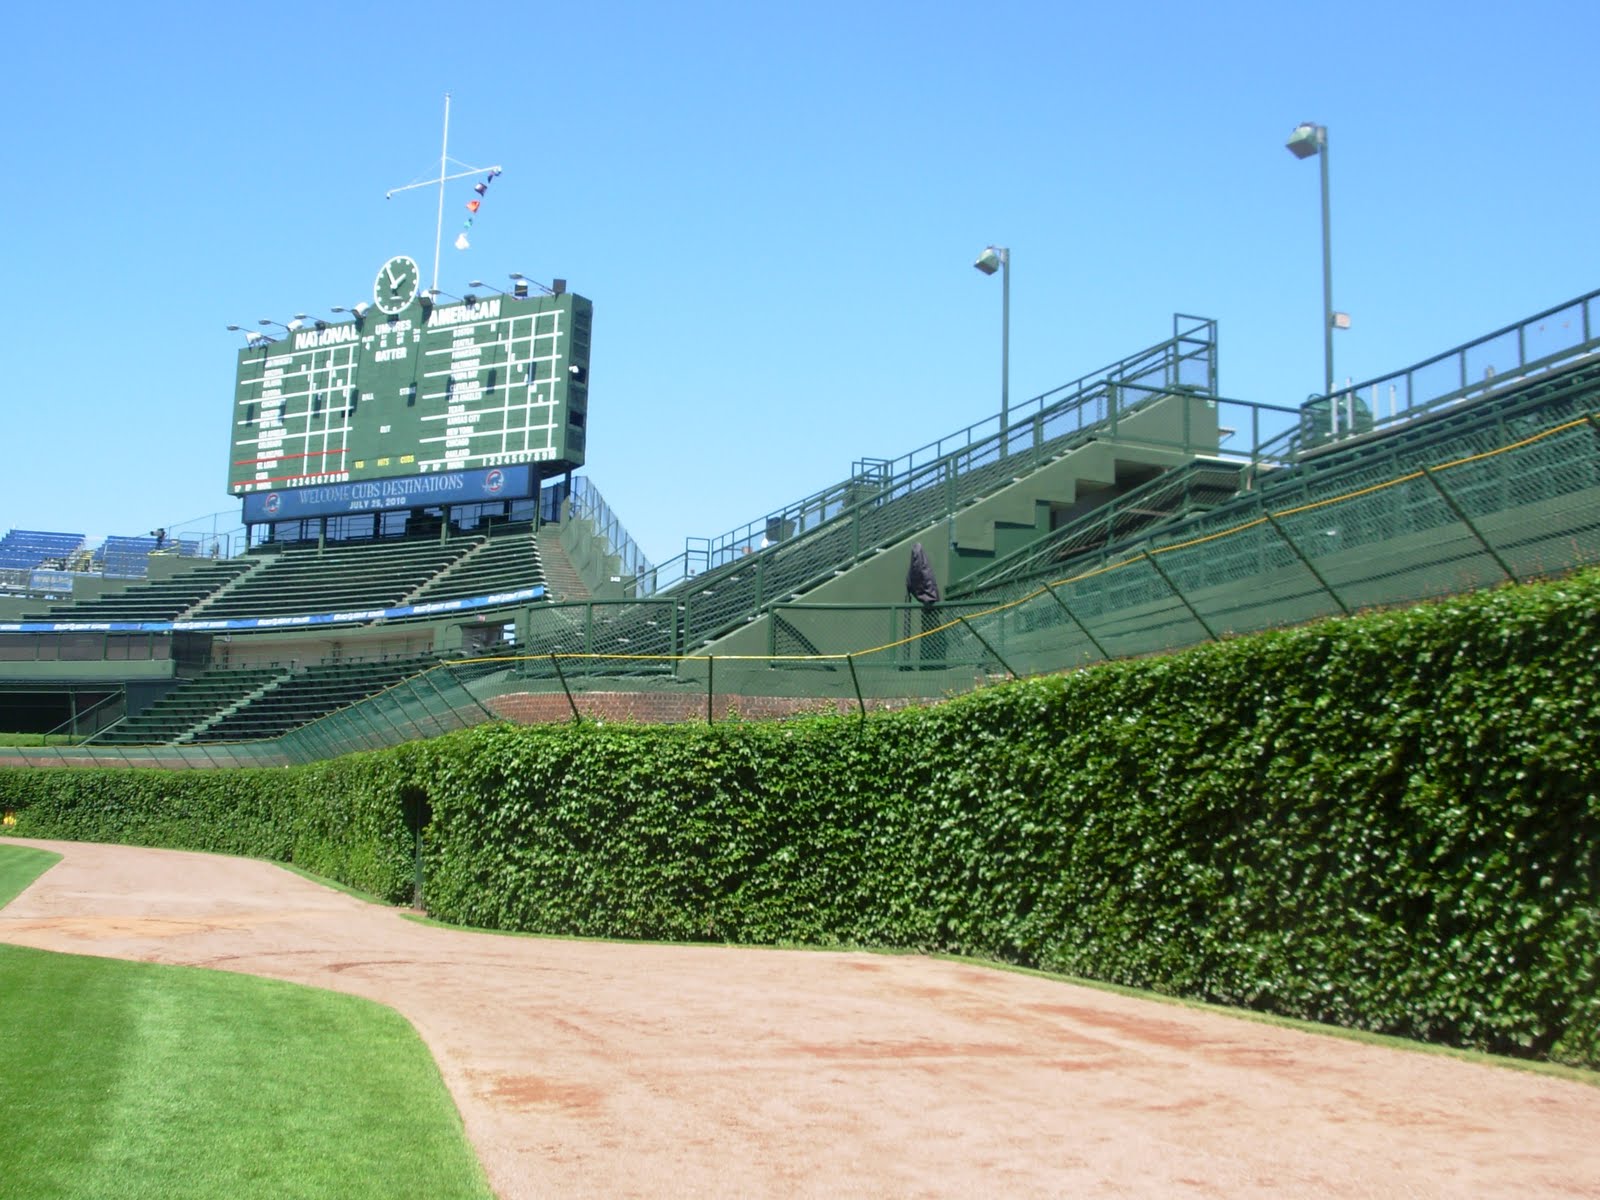 Wrigley Field Ivy We Walked To The Geous